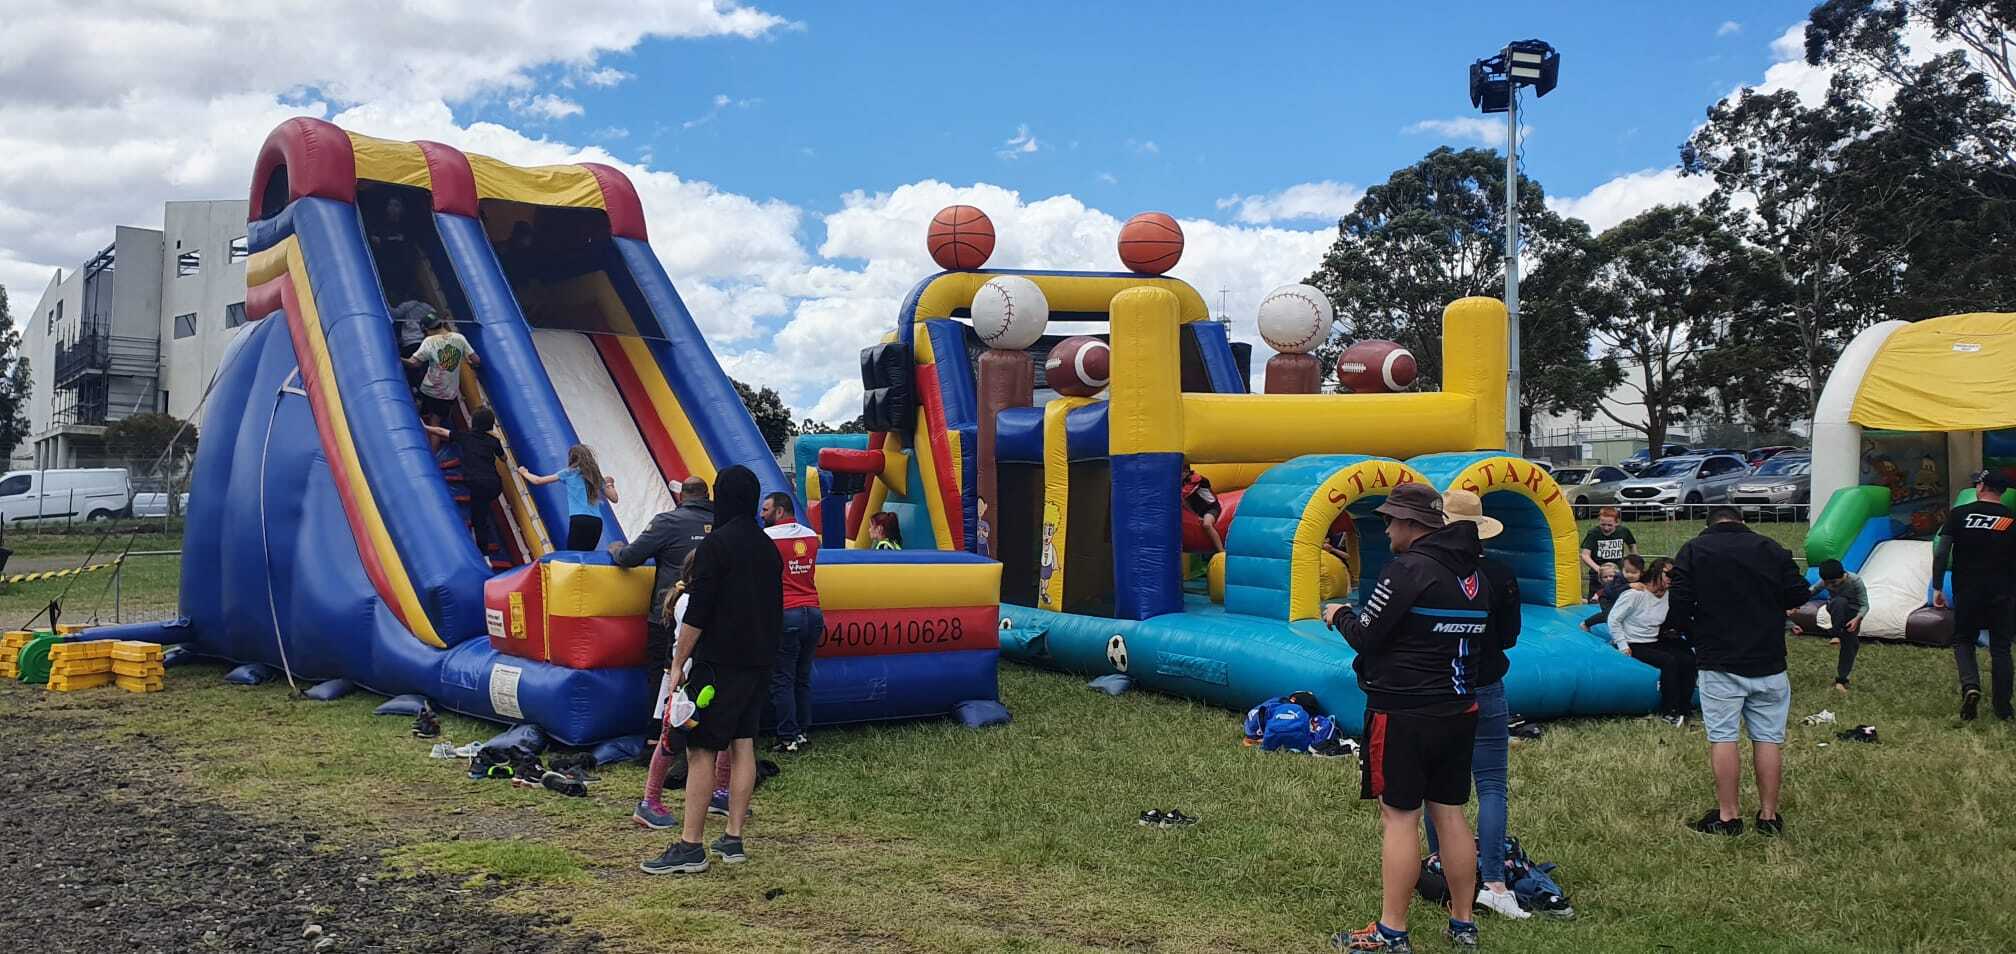 Jumping Castles For Hire In Sydney